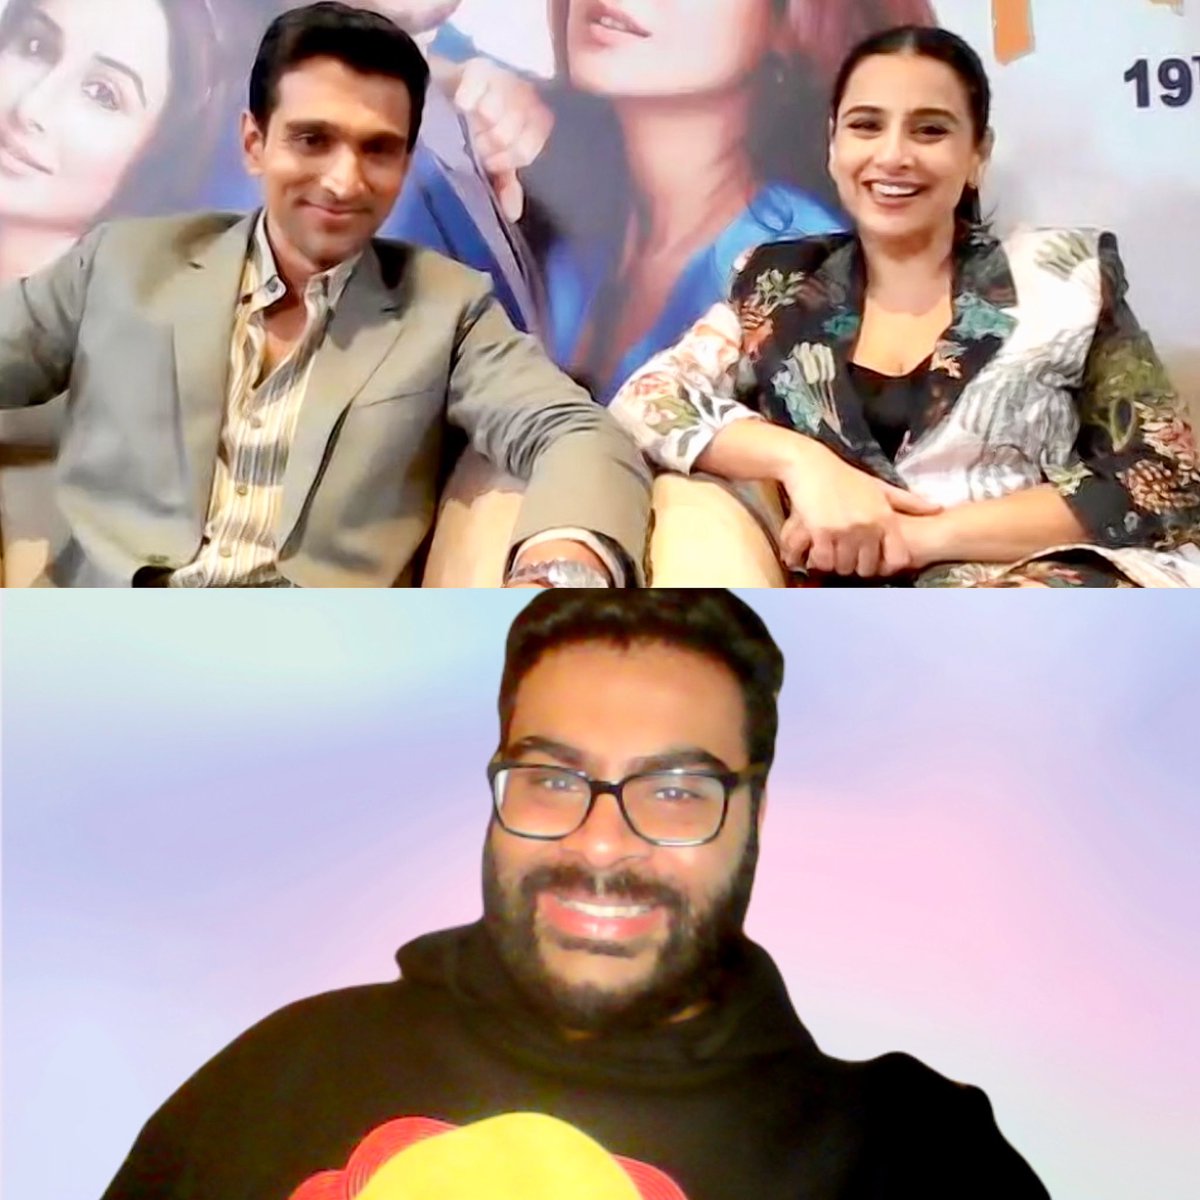 We’ve always enjoyed speaking @pratikg80 & @vidya_balan on @filmeshilmy. Delighted to have hosted another wonderful chat with them on their upcoming rom com #DoAurDoPyaar, as they share screen space for the first time. Interview coming on SUNDAY 7PM IST on #FilmeShilmy YouTube…